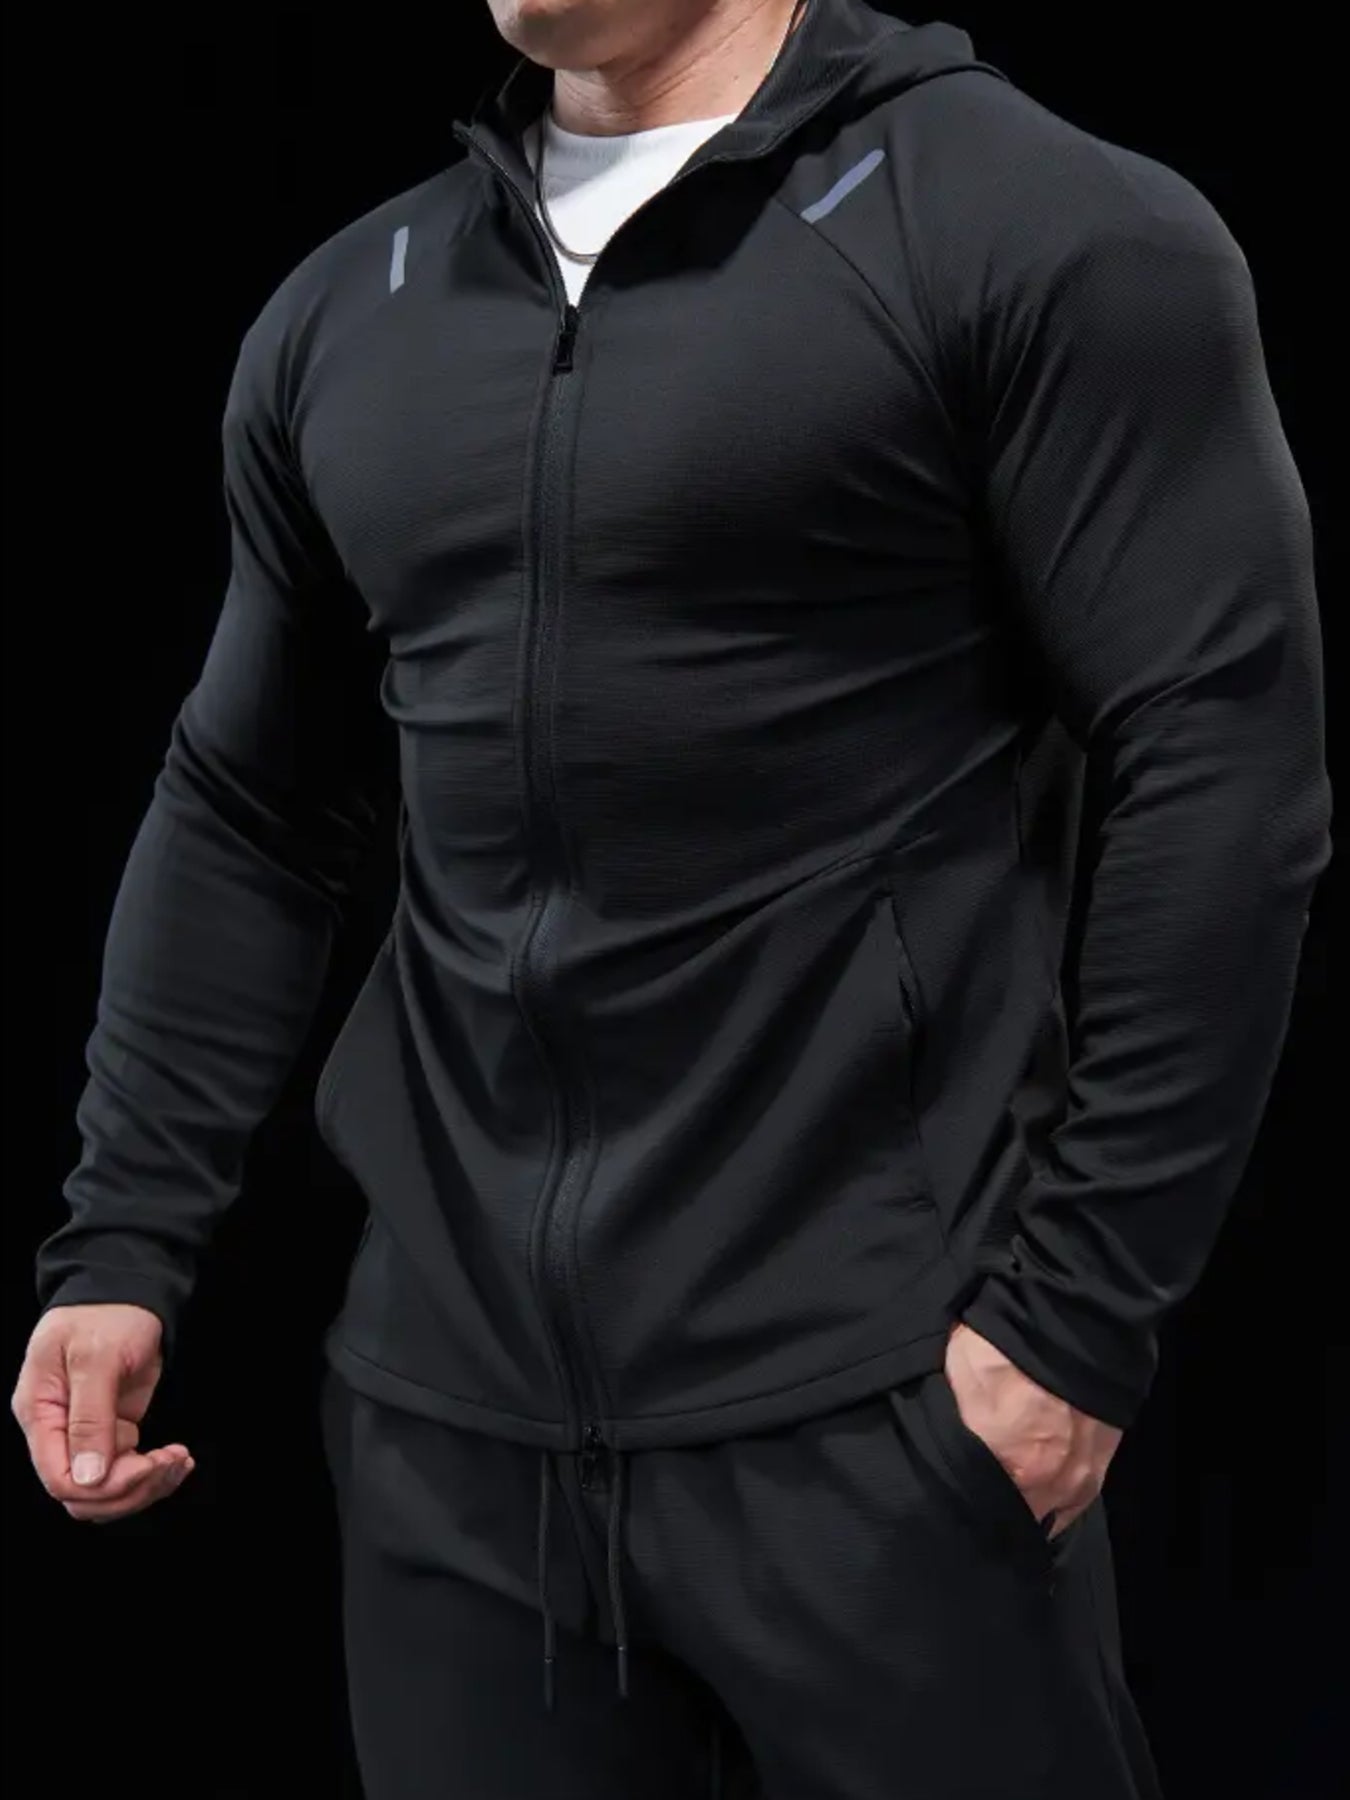 SmoothBlend ElevateMotion Quick Dry Sports Fitness Hooded Jacket